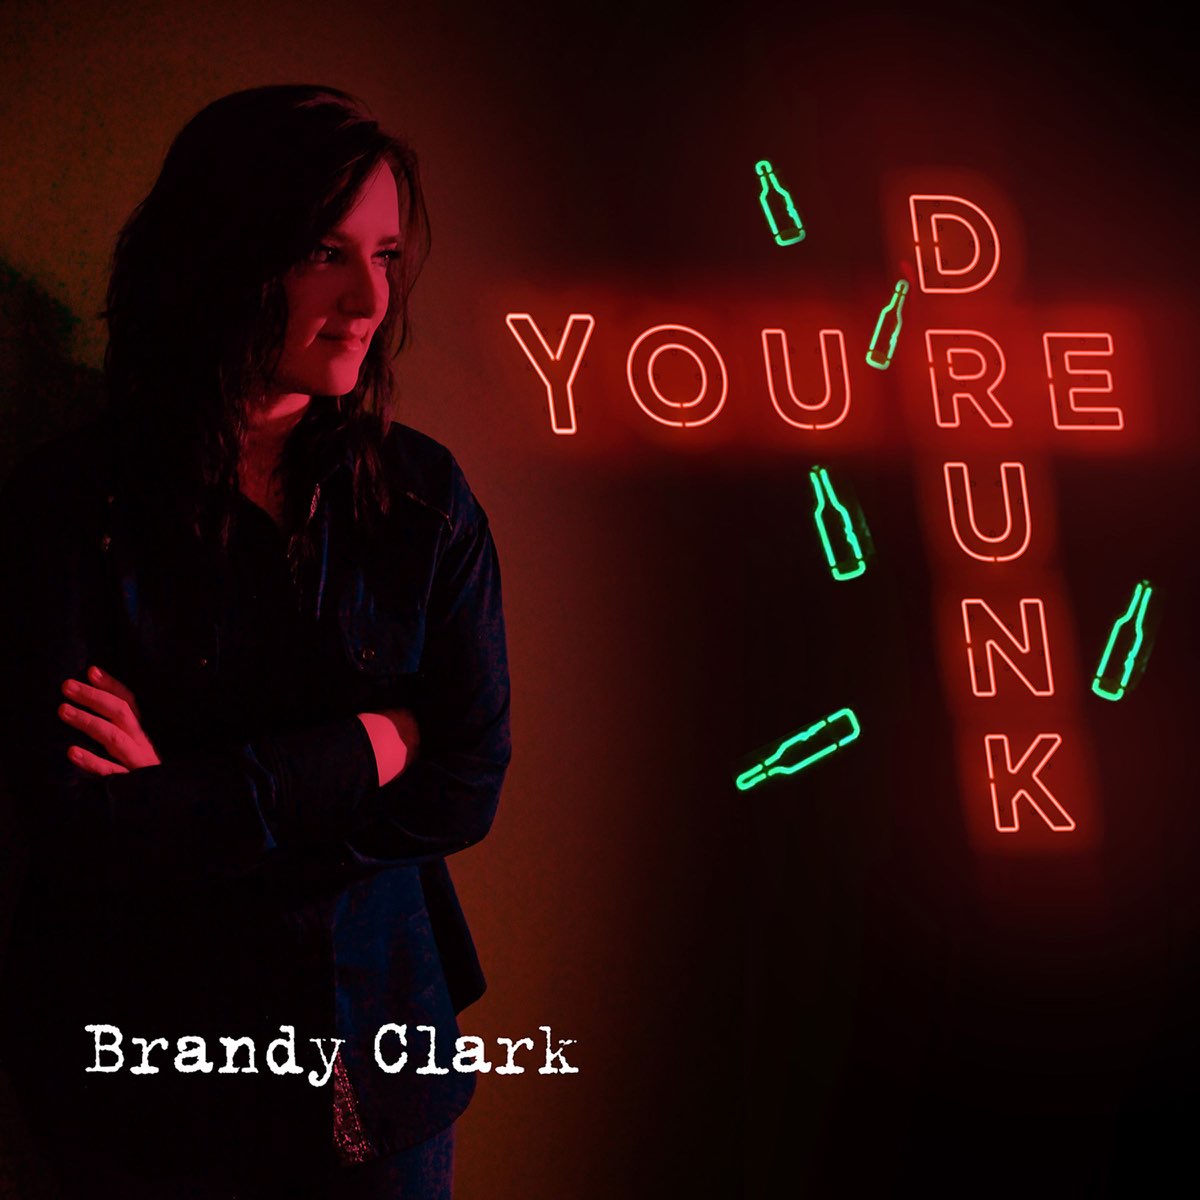 Im drunk. Brandy Clark. Brandy Clark Brandy Clark. Big Day in a small Town бренди Кларк. Brandy albums.